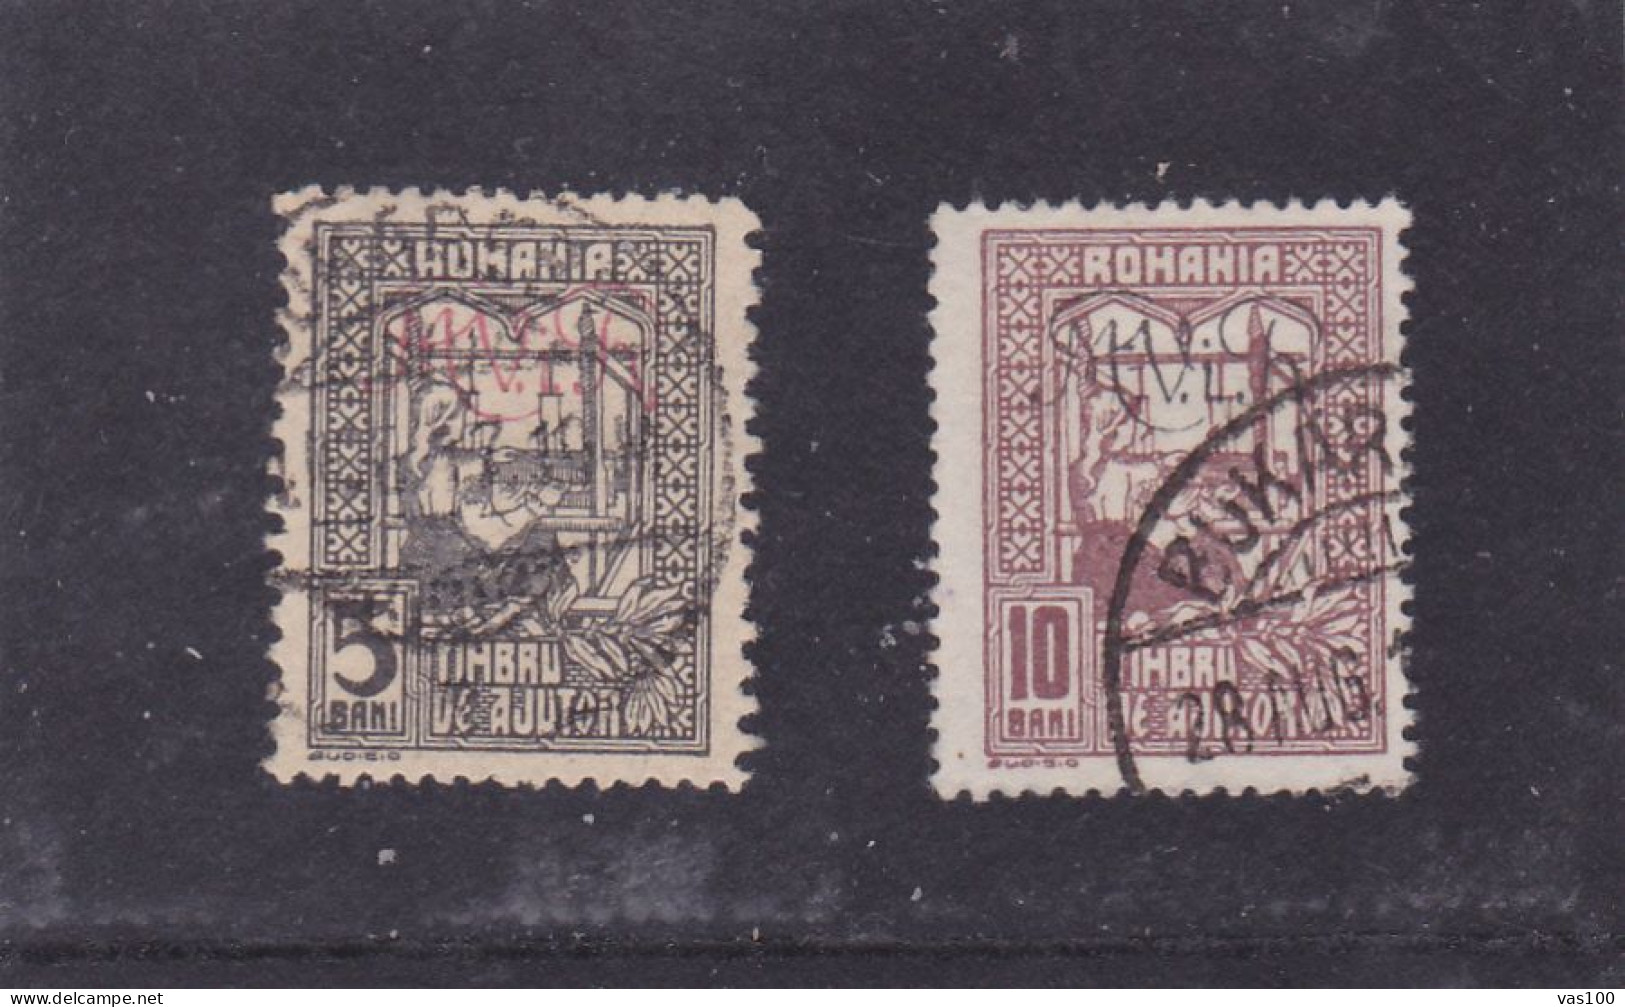 Germany WW1 Occupation In Romania 1917 MViR  2 STAMPS POSTAGE DUE USED - Besetzungen